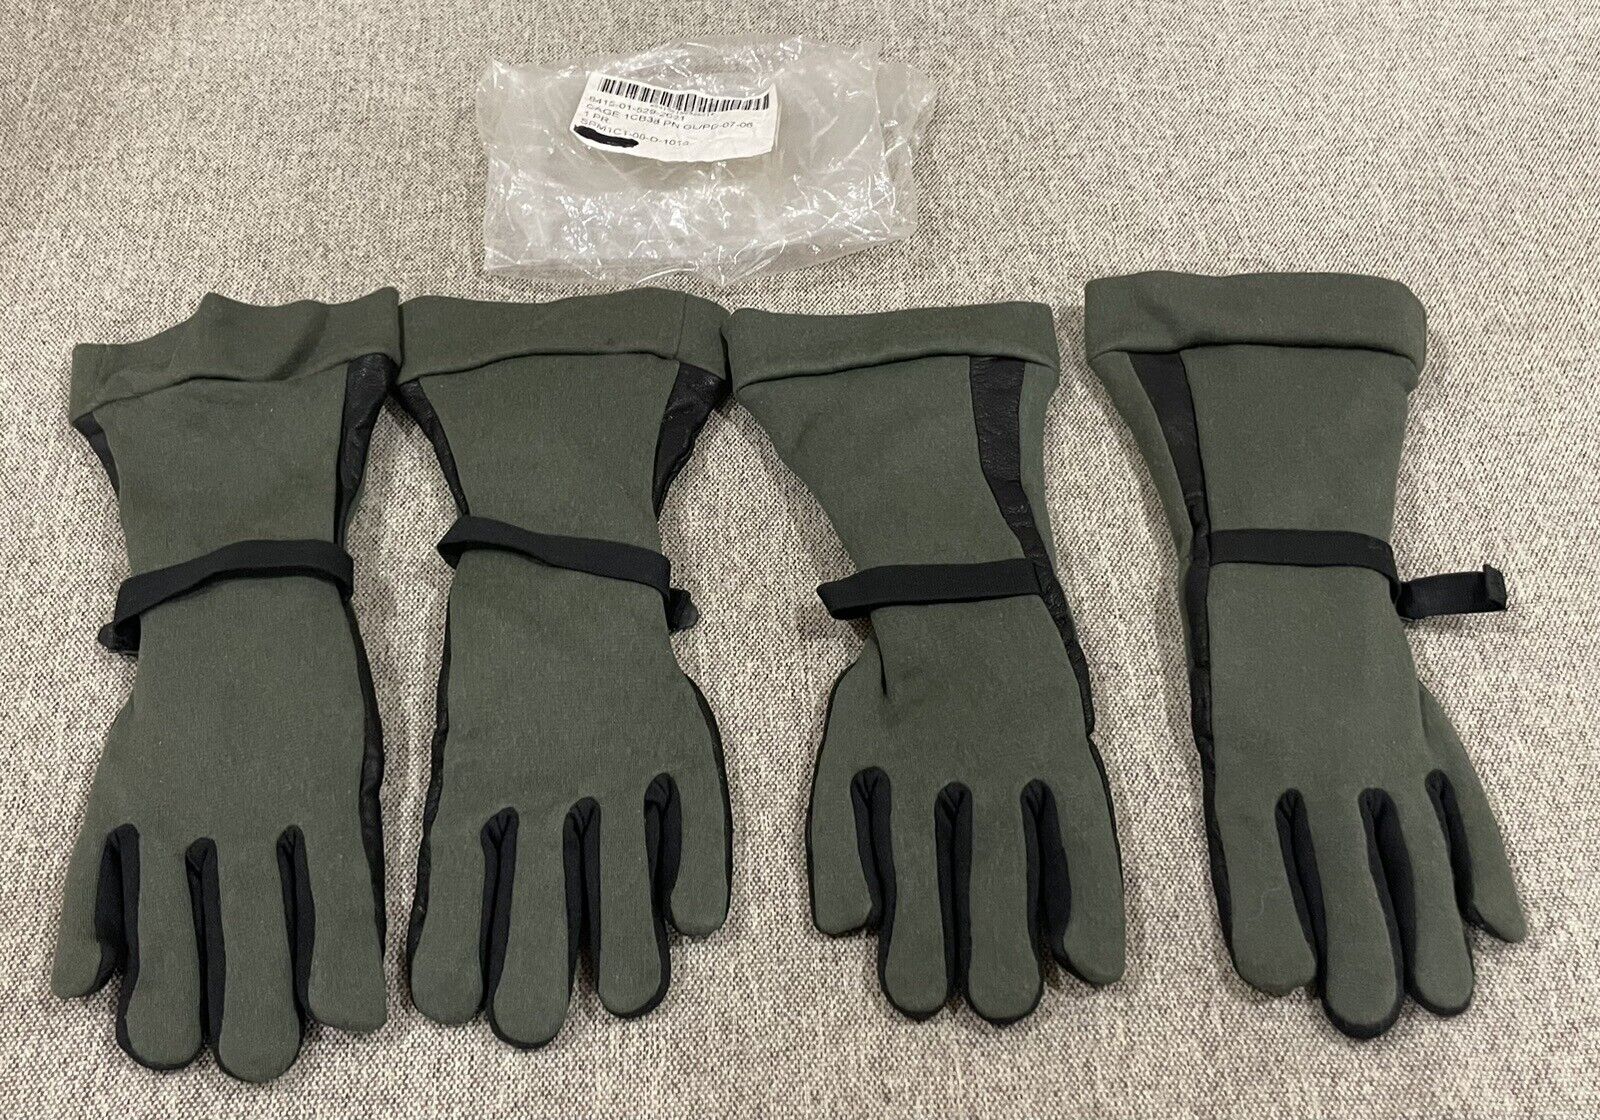 US MILITARY ISSUE 2 PR FUEL HANDLERS GLOVES FOLIAGE GREEN Large 8415-01-529-2621